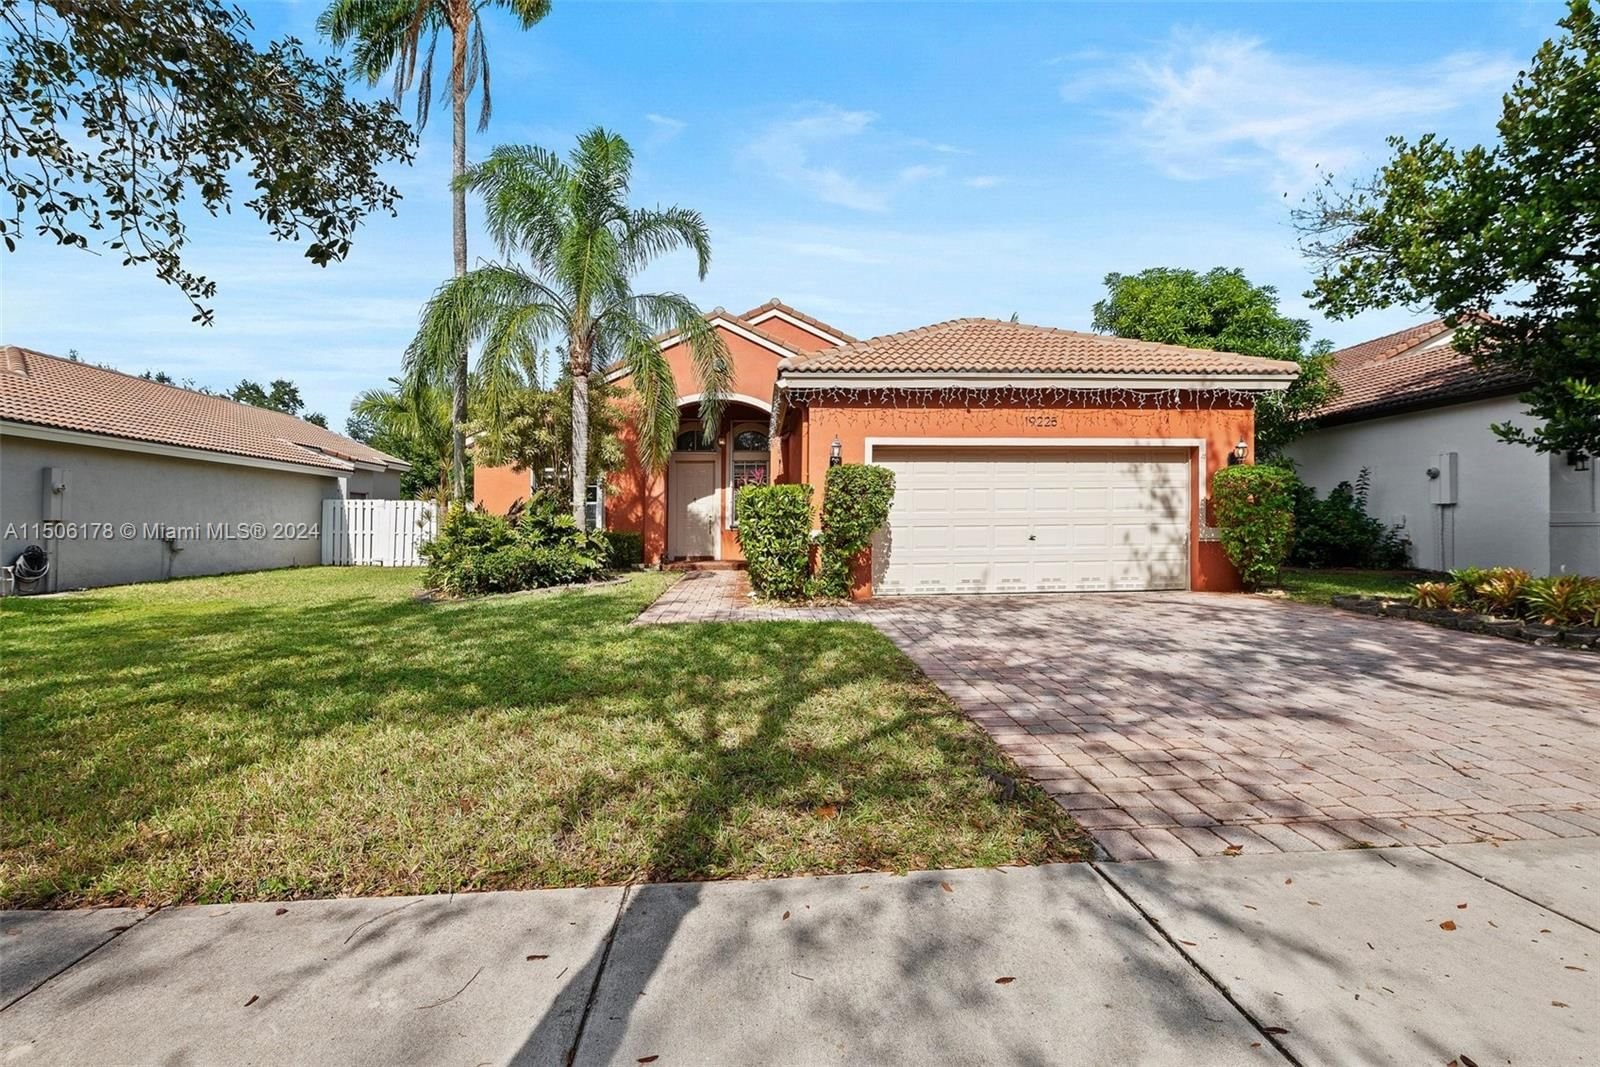 Real estate property located at 19225 25th Ct, Broward County, SUNSET LAKES PLAT TWO, Miramar, FL